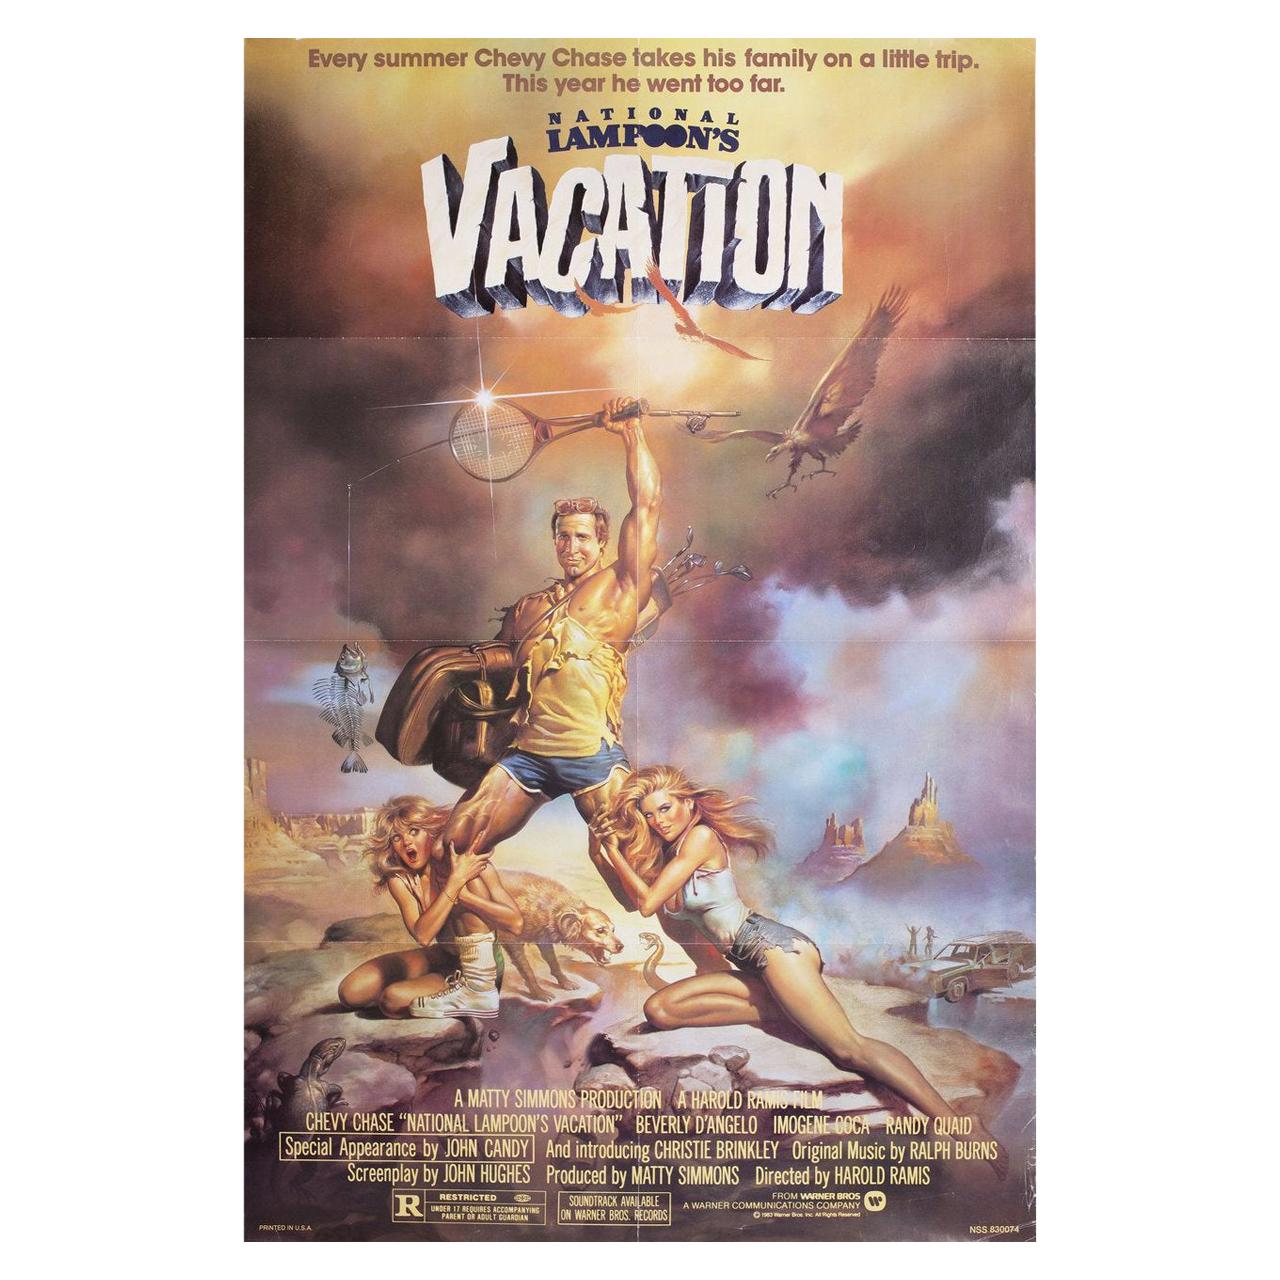 "National Lampoon's Vacation" 1983 U.S. One Sheet Film Poster